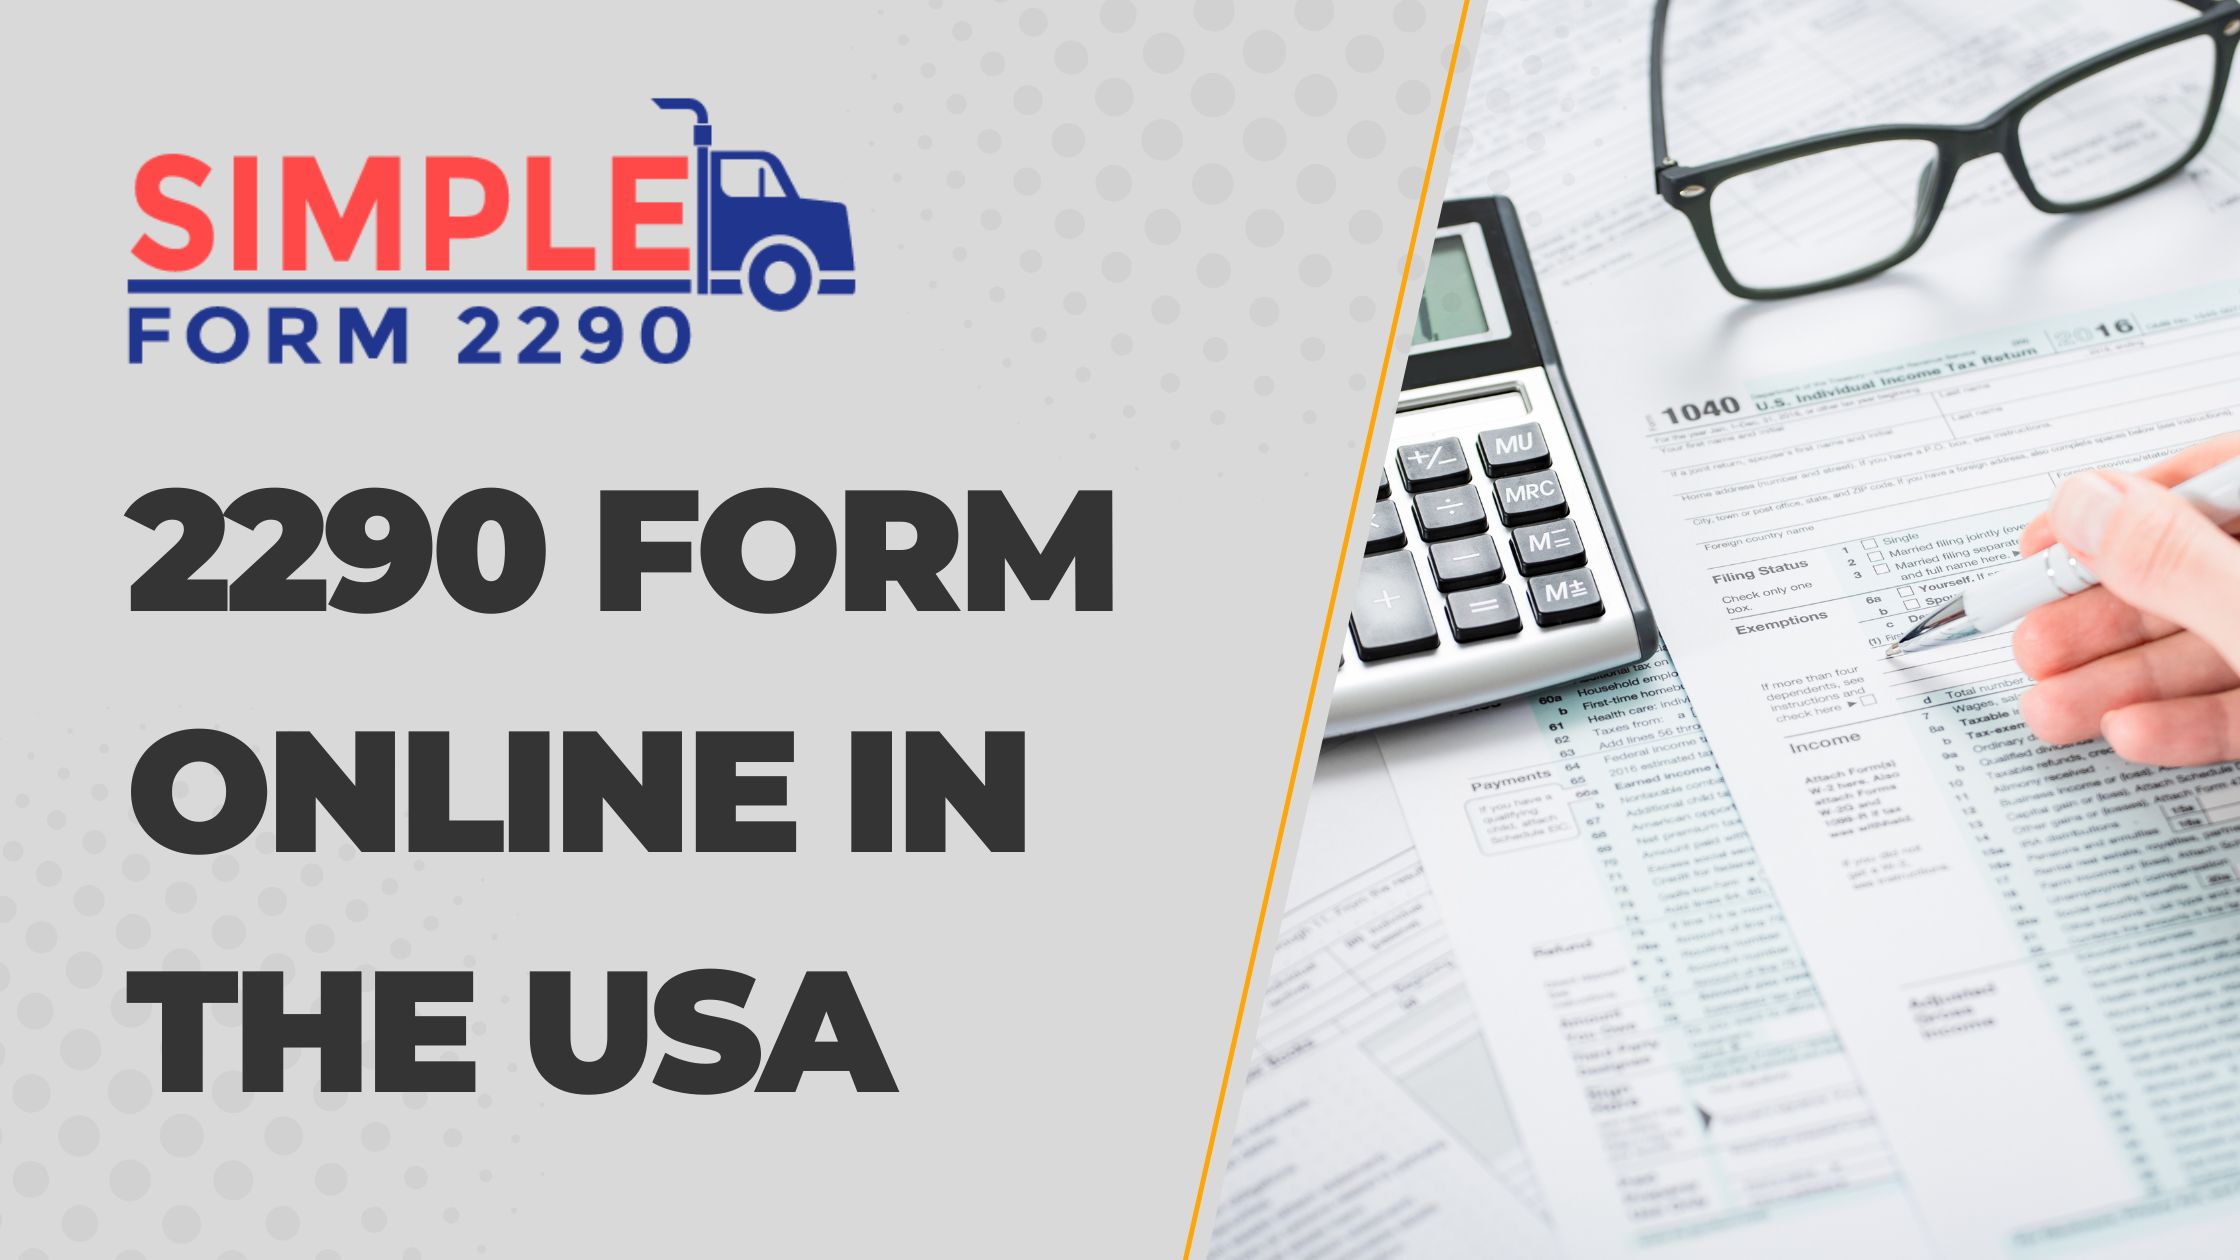 2290 FORM ONLINE IN THE USA